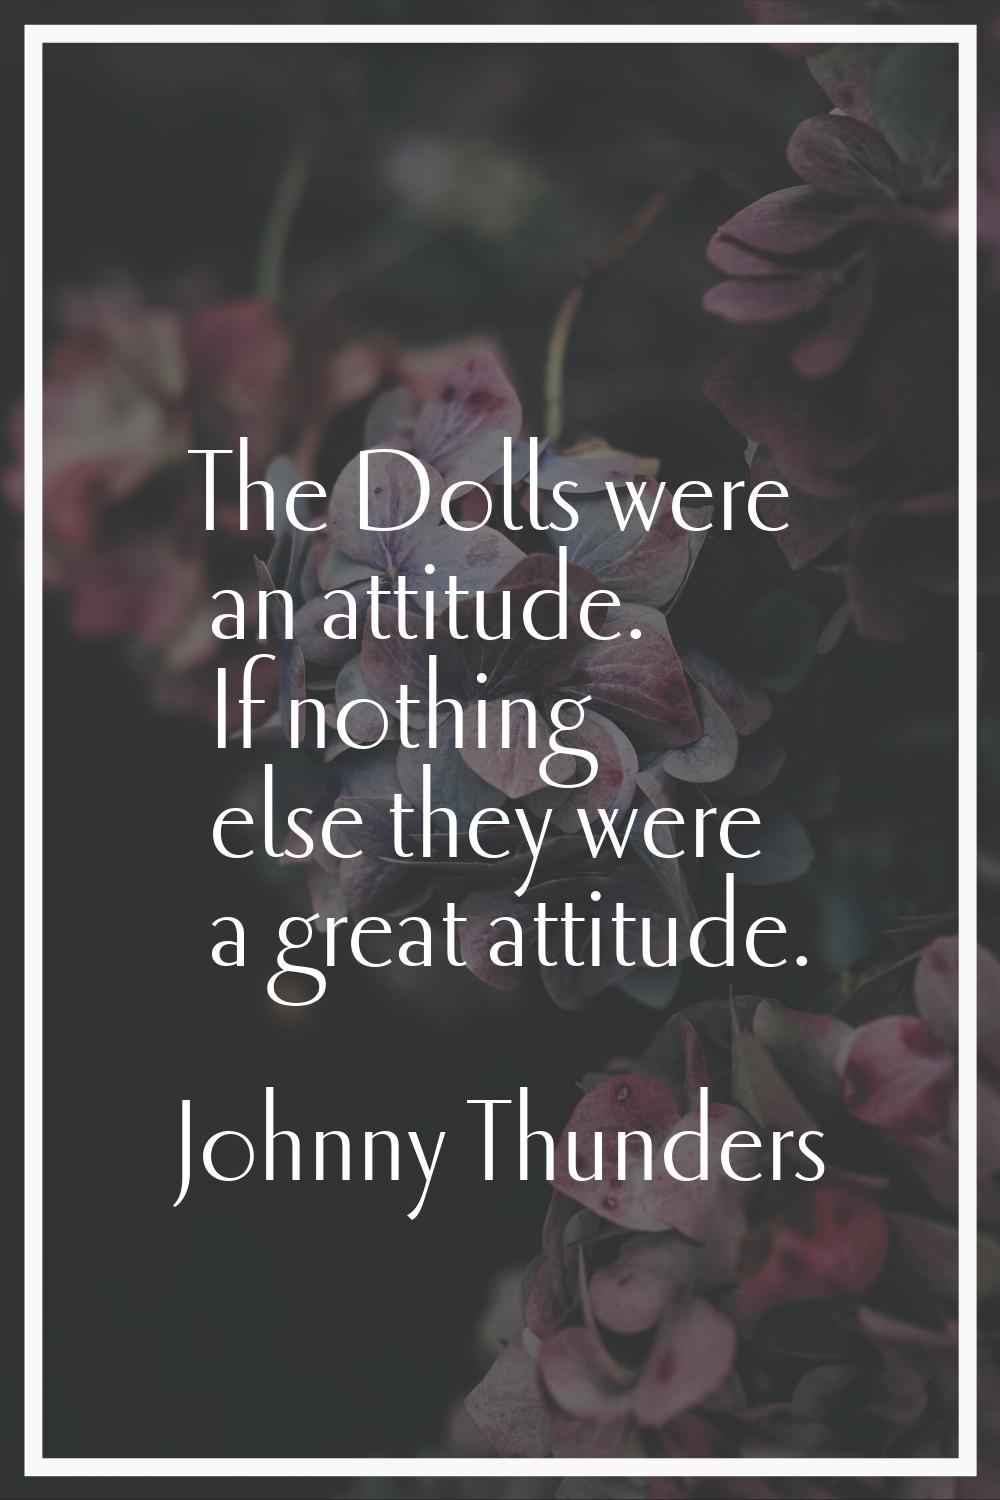 The Dolls were an attitude. If nothing else they were a great attitude.